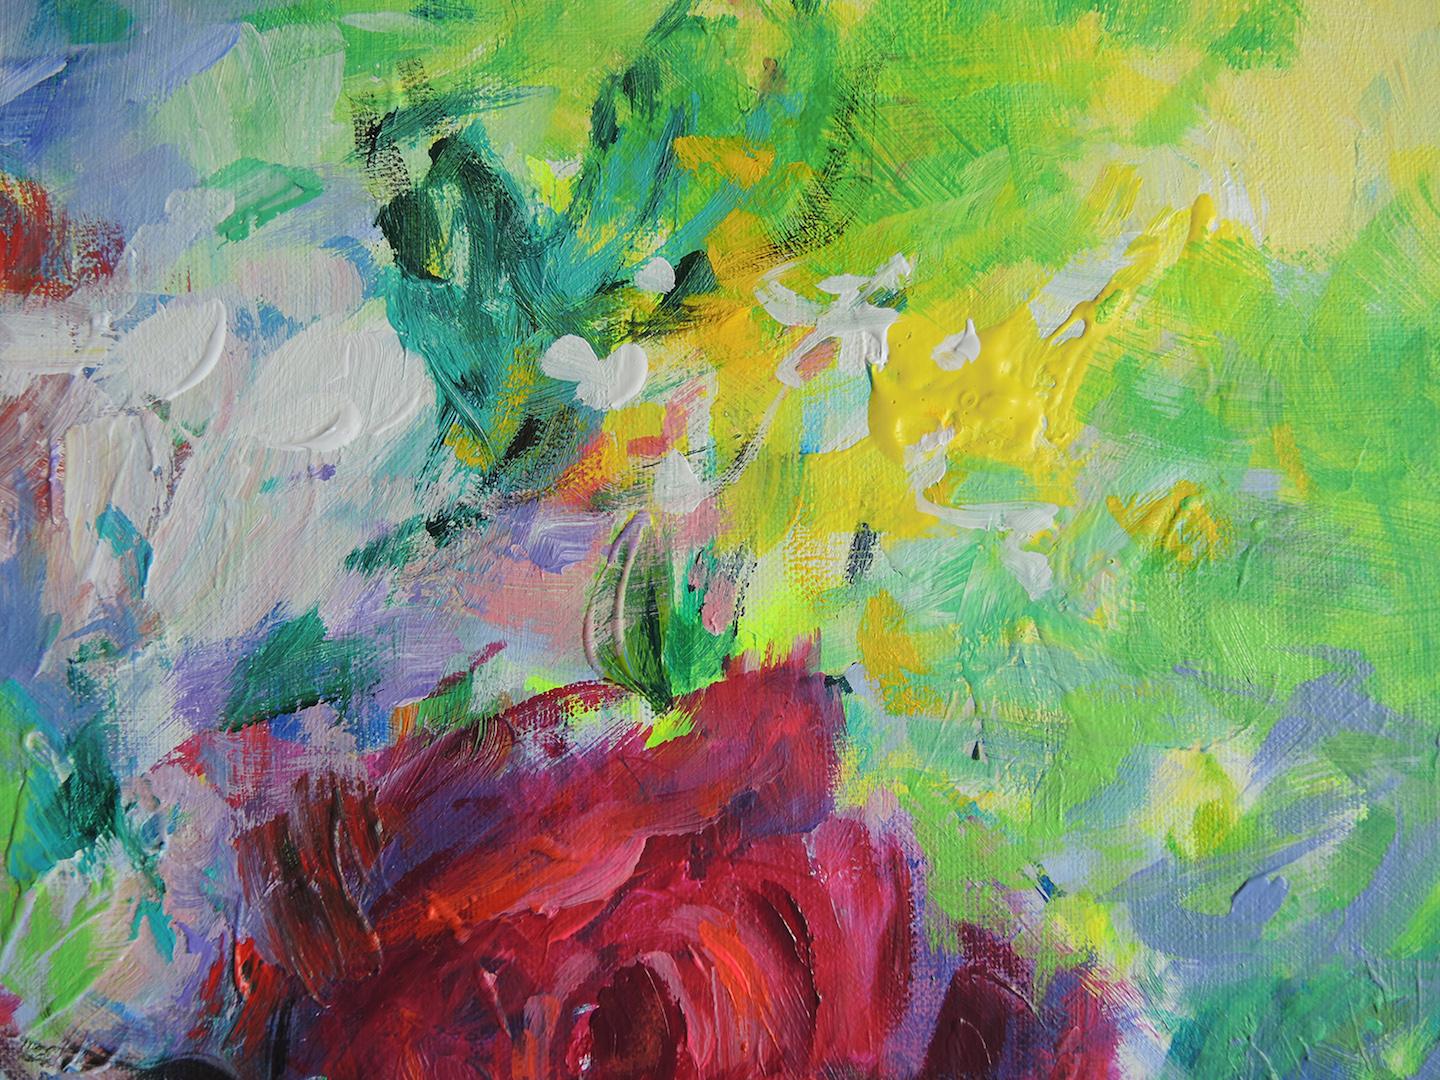 Mary Chaplin
Roses in an Opaline Vase
Original Still Life Painting
Acrylic on Canvas
Canvas Size: H 50cm x W 40cm x D 2cm
Sold Unframed
Ready to Hang
Please note that insitu images are purely an indication of how a piece may look.

Roses in an